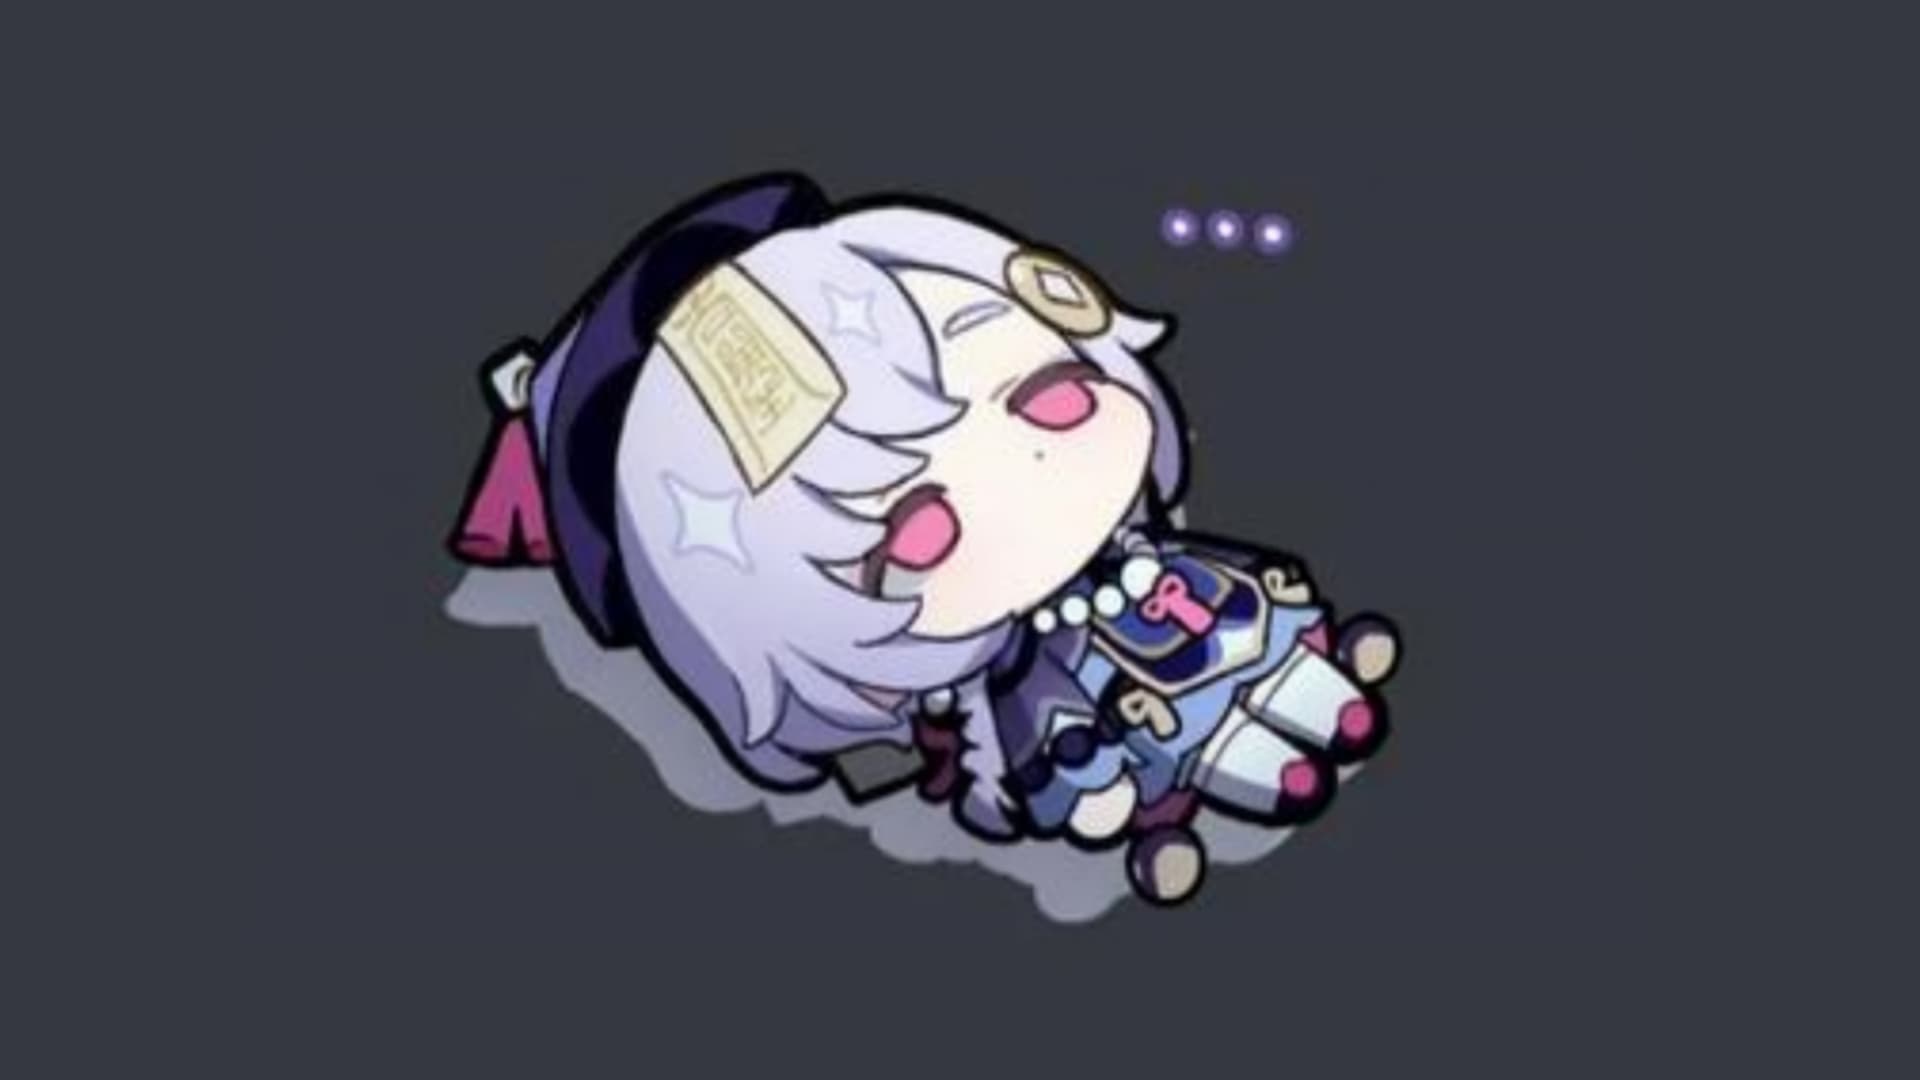 Honkai Star Rail adds chat feature in an unannounced update: chibi anime girl lying down with blank expression